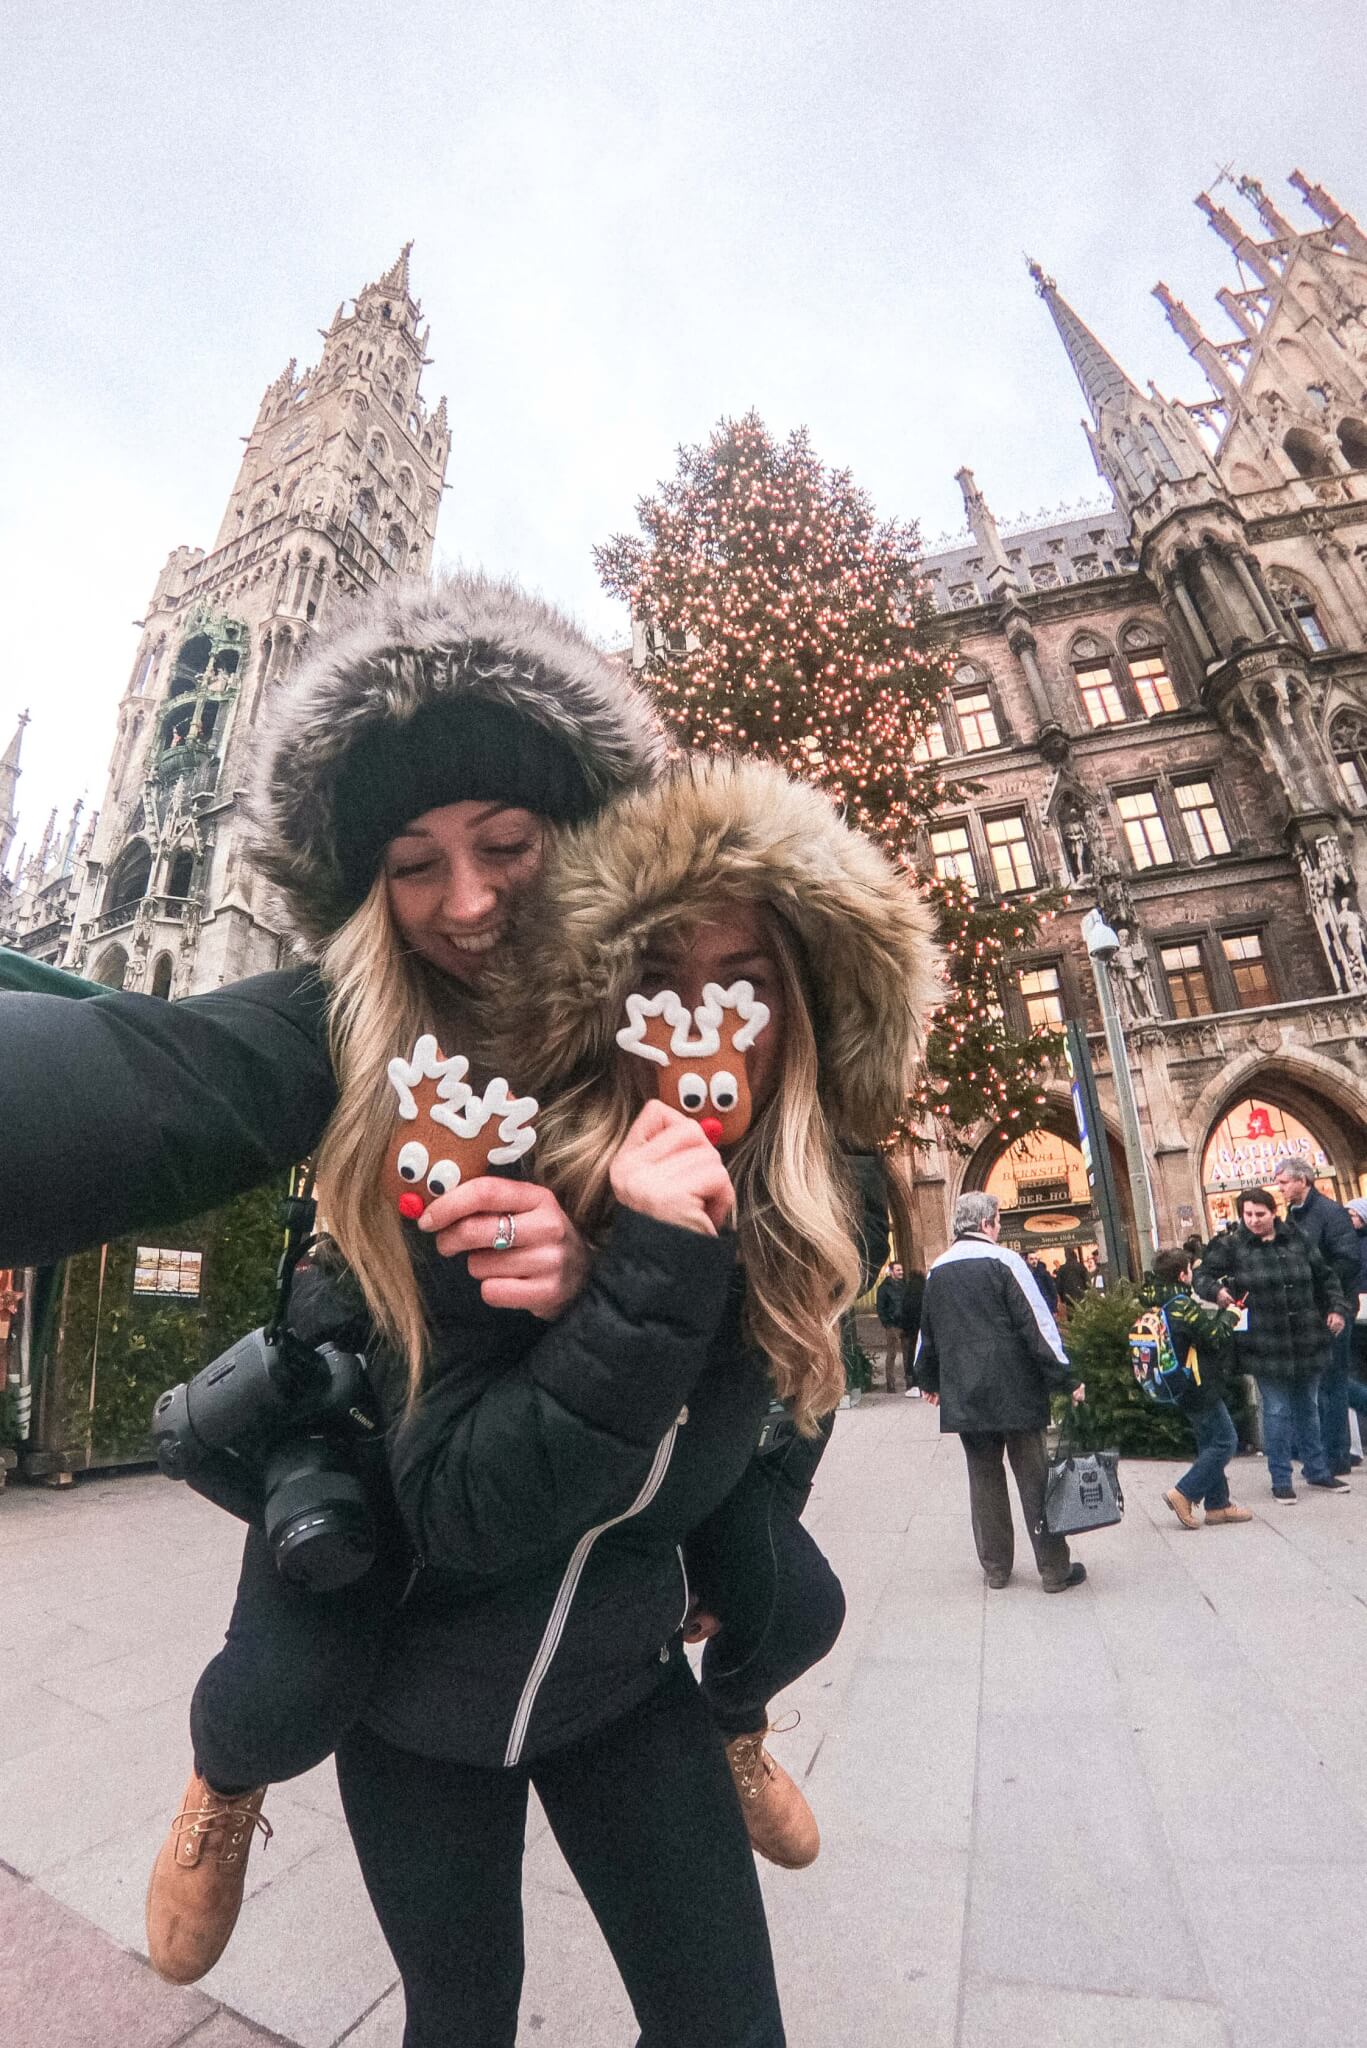 The ultimate christmas markets roadtrip through Europe | Where's Mollie? A travel and adventure lifestyle blog